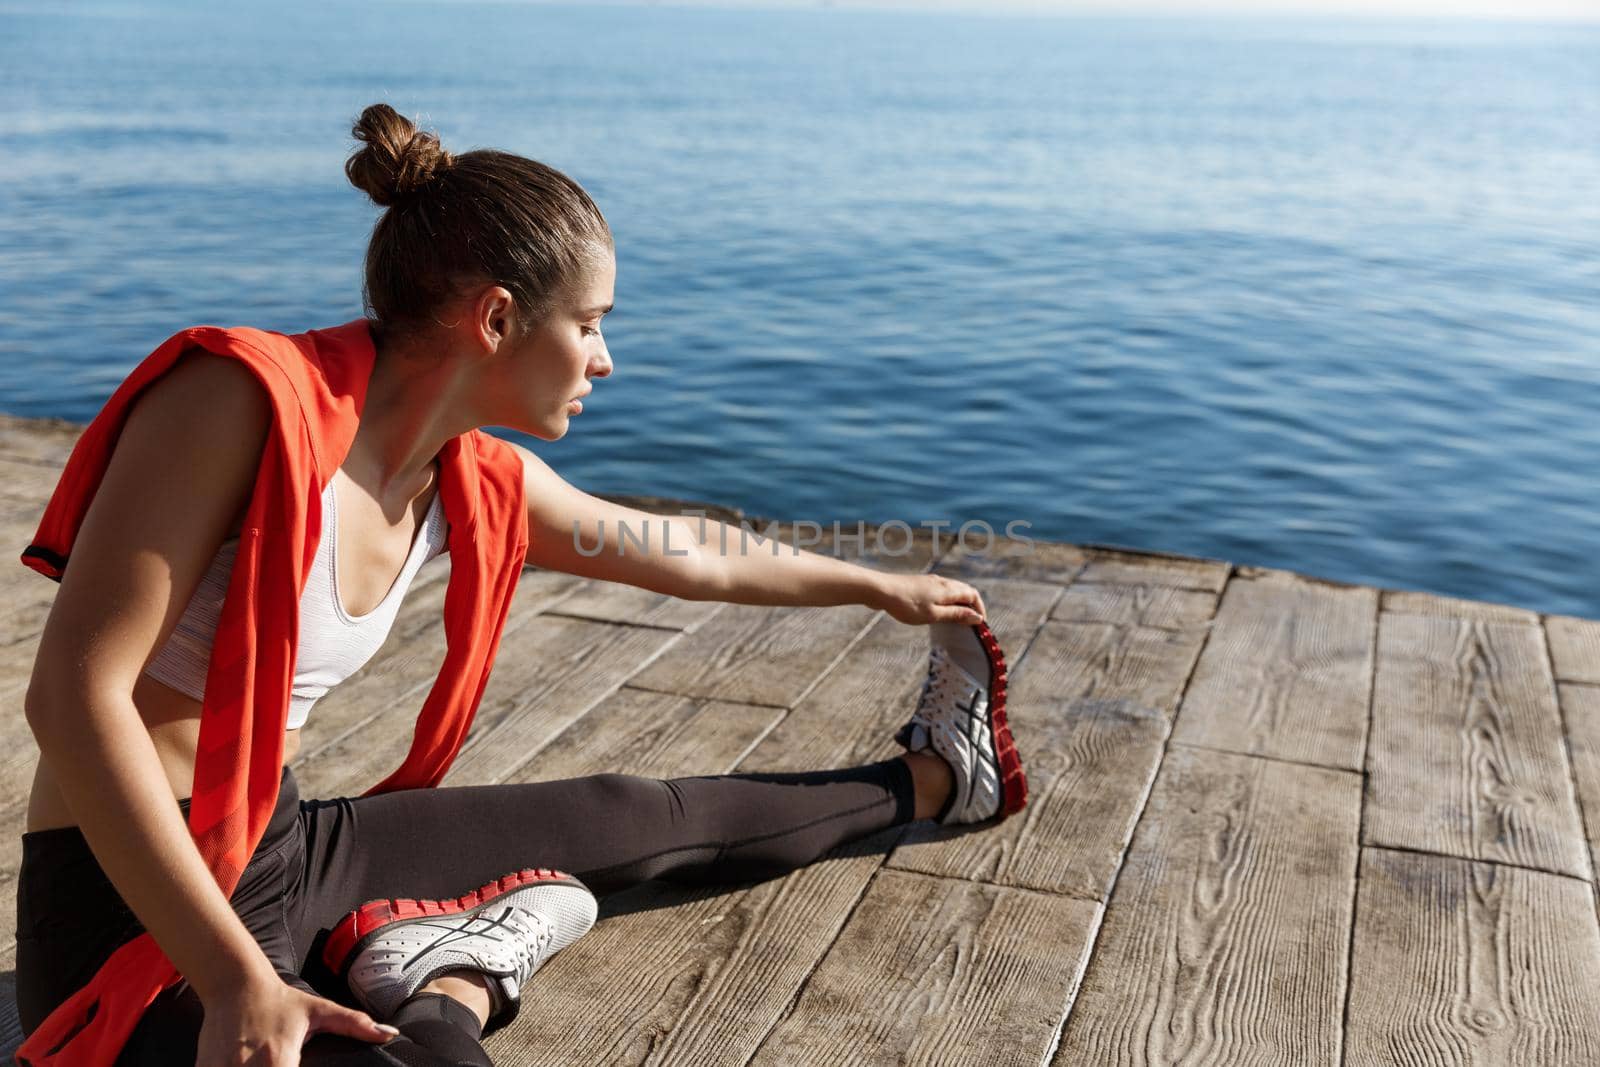 Outdoor shot of attractive fitness woman warming-up before jogging, sitting on pier and stretching legs.